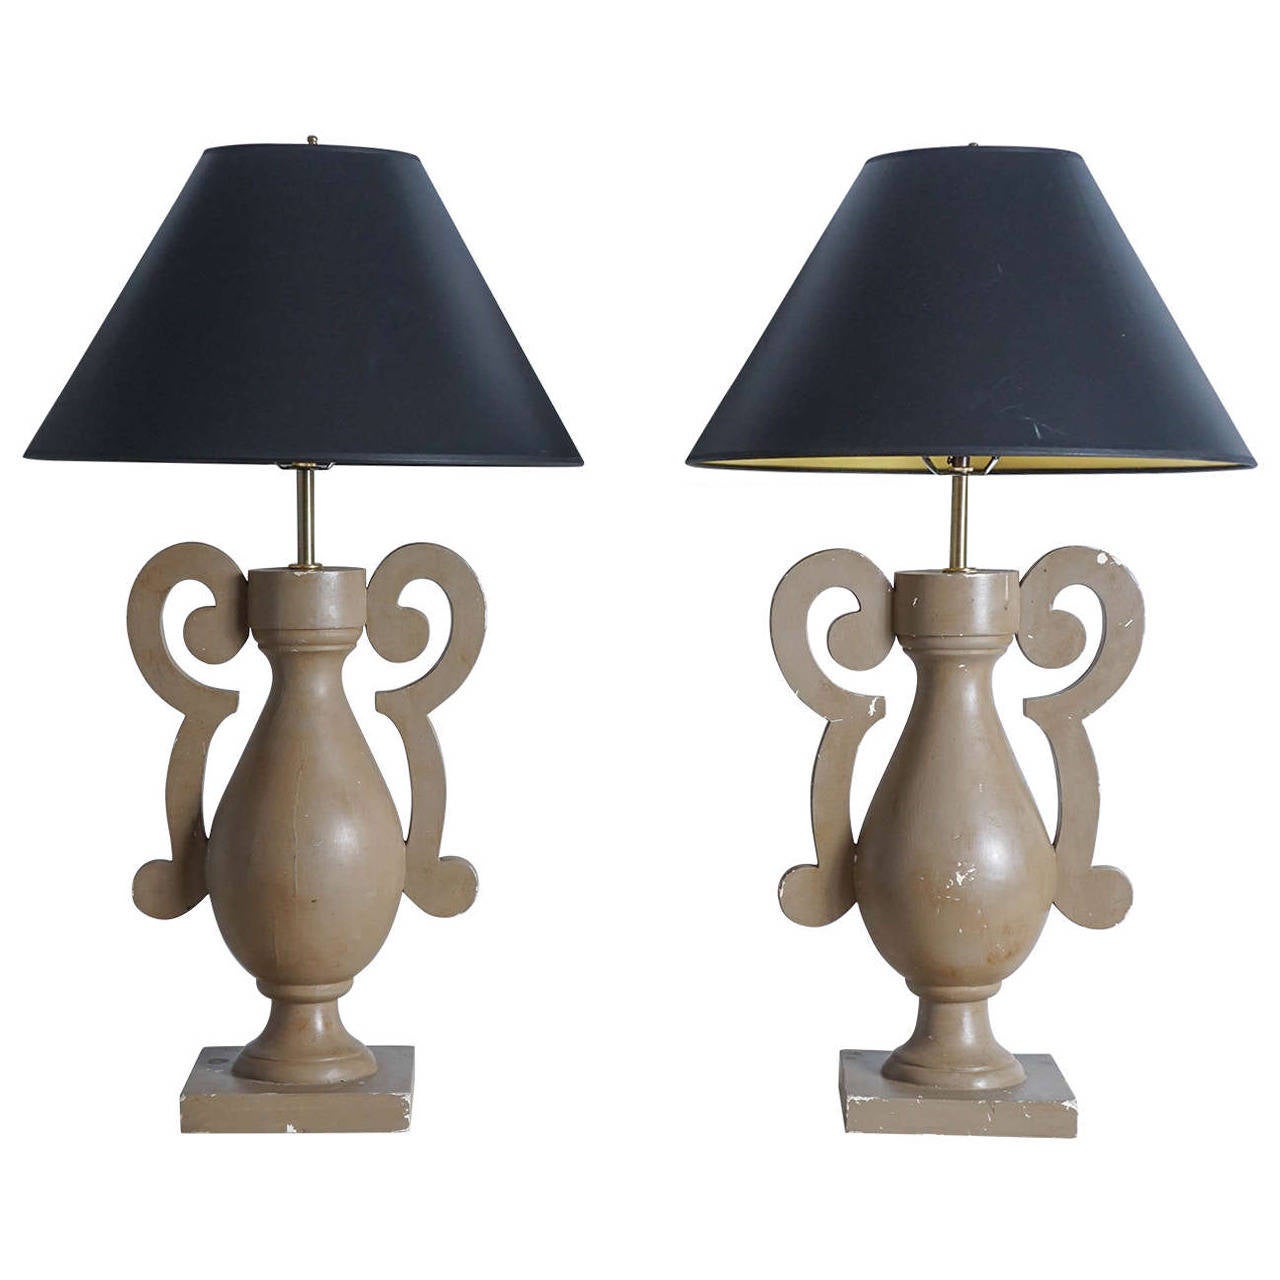 Lovely Pair of Wooden Lamps Painted a Warm Gray. ( Paint displays some chips or losses) Easily Painted to your Desired Color